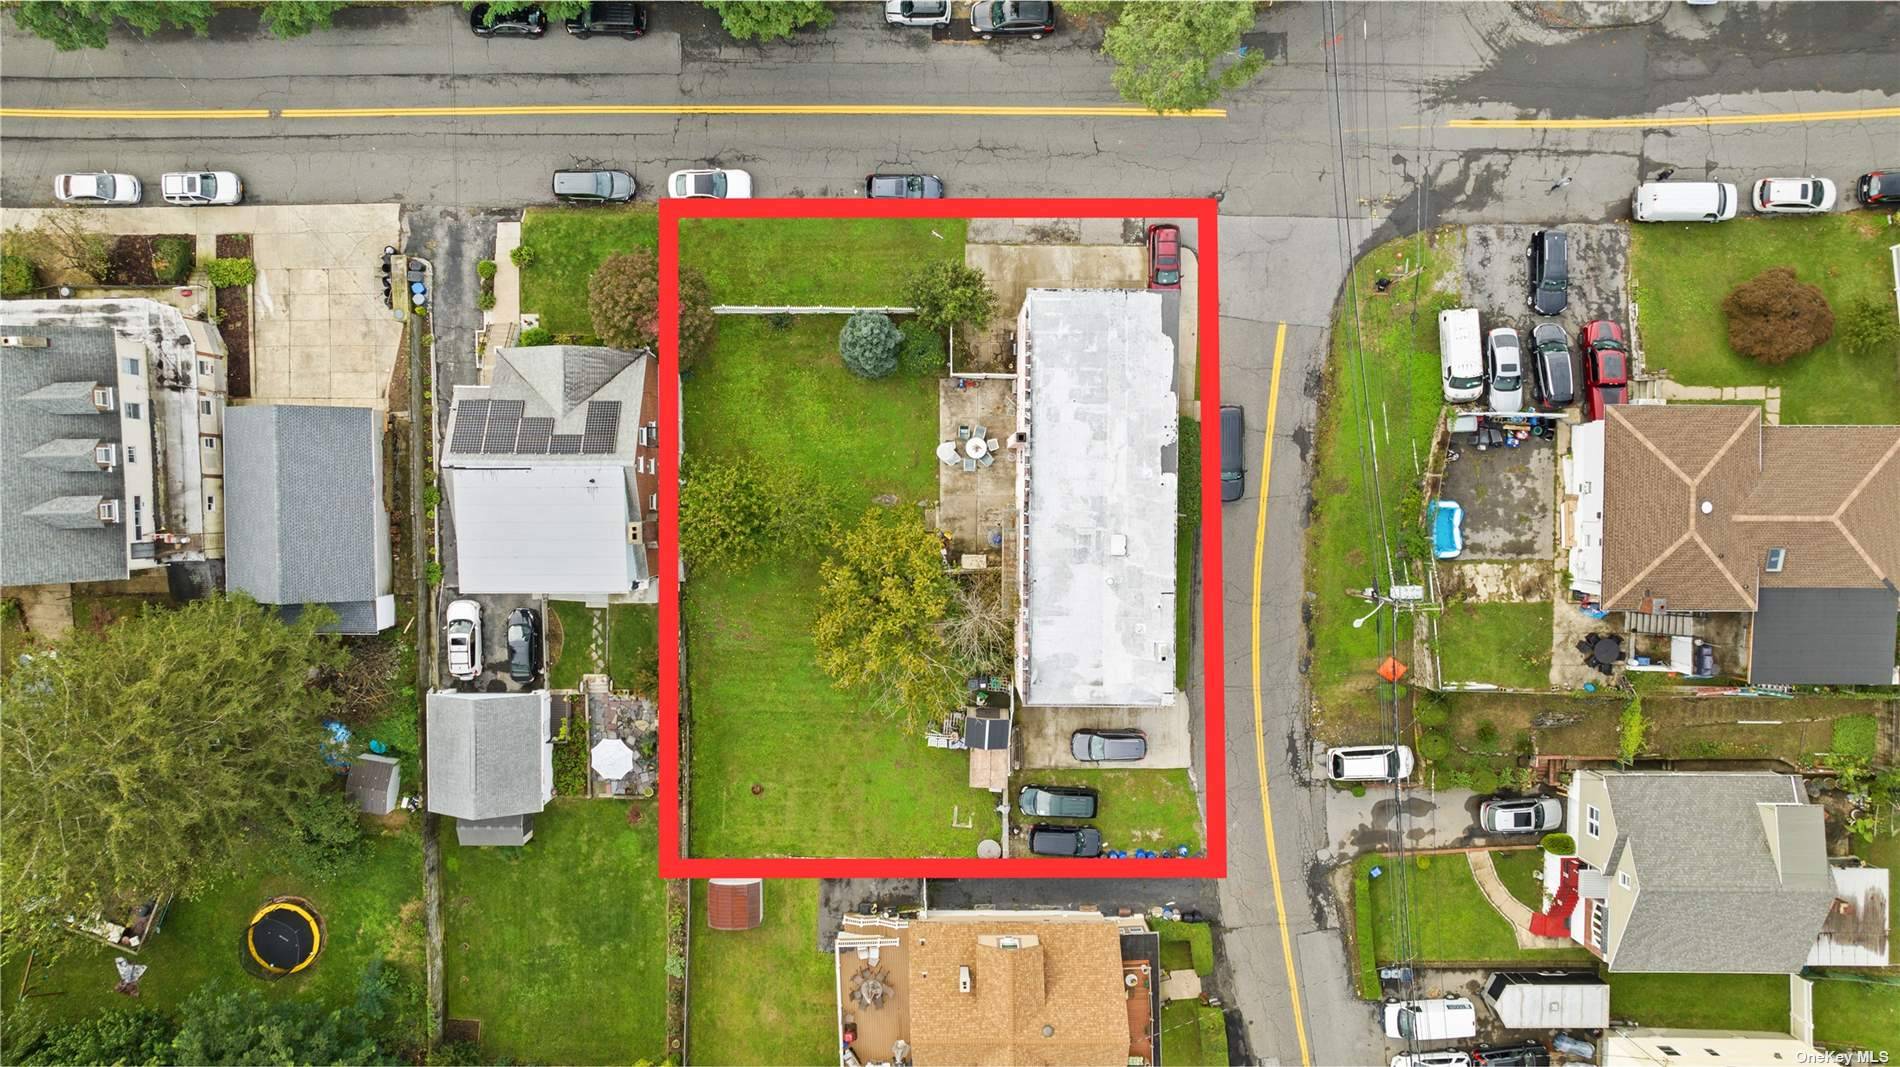 Excellent opportunity available in the Northern Yonkers neighborhood of Nepera Park.